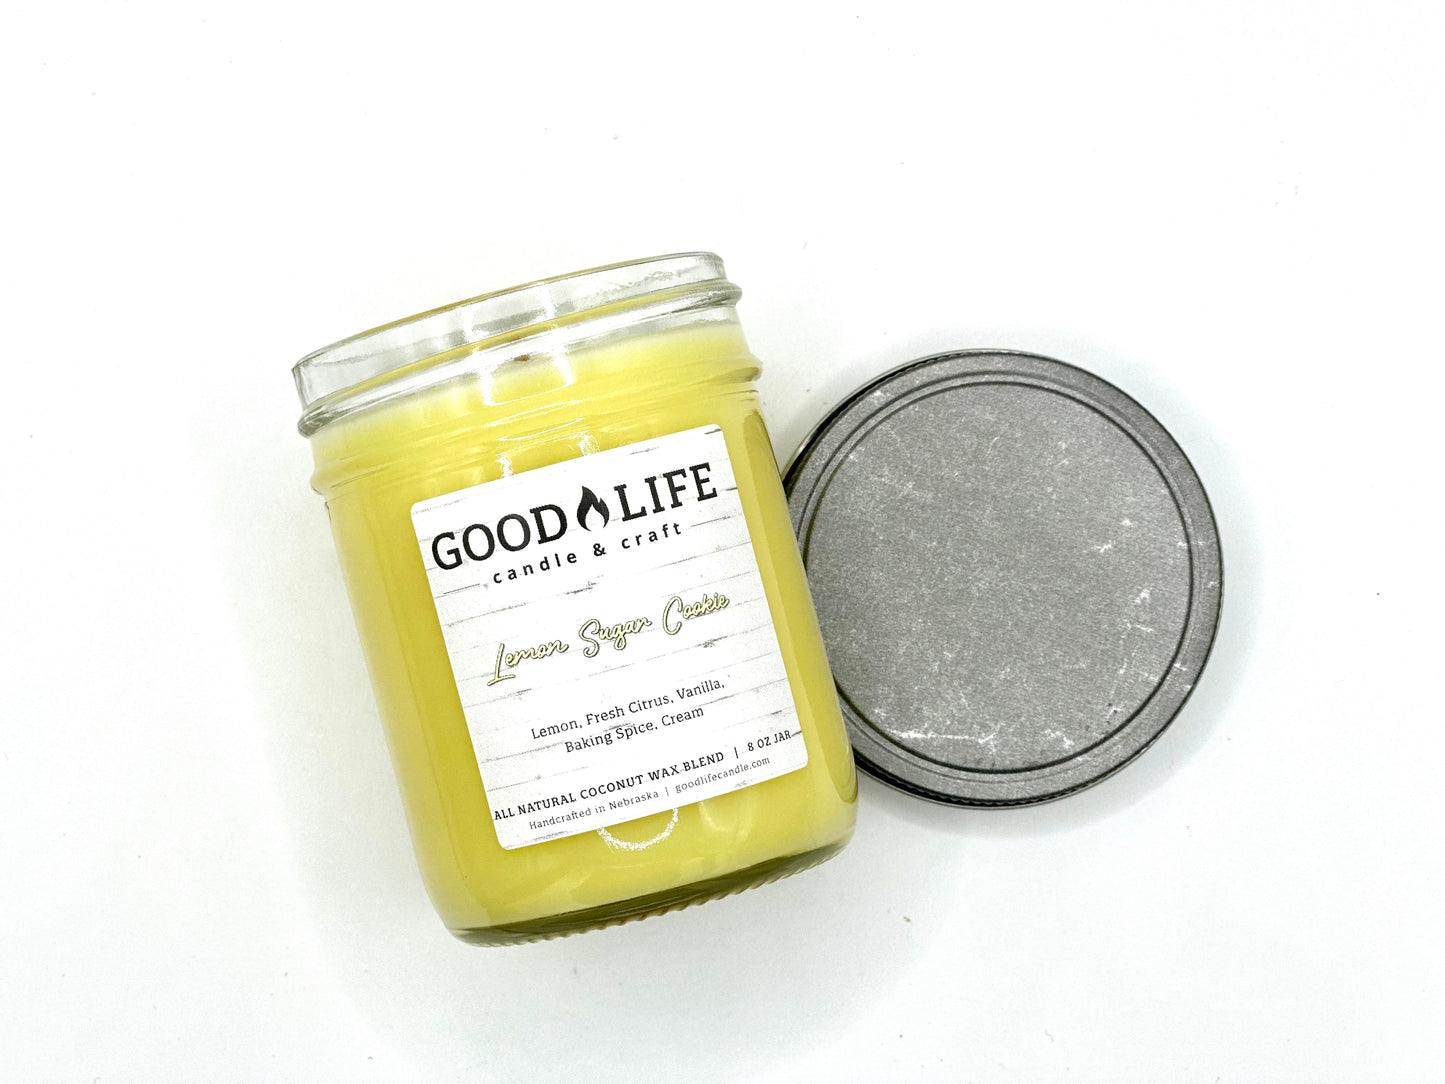 Lemon Sugar Cookie Scented Candle